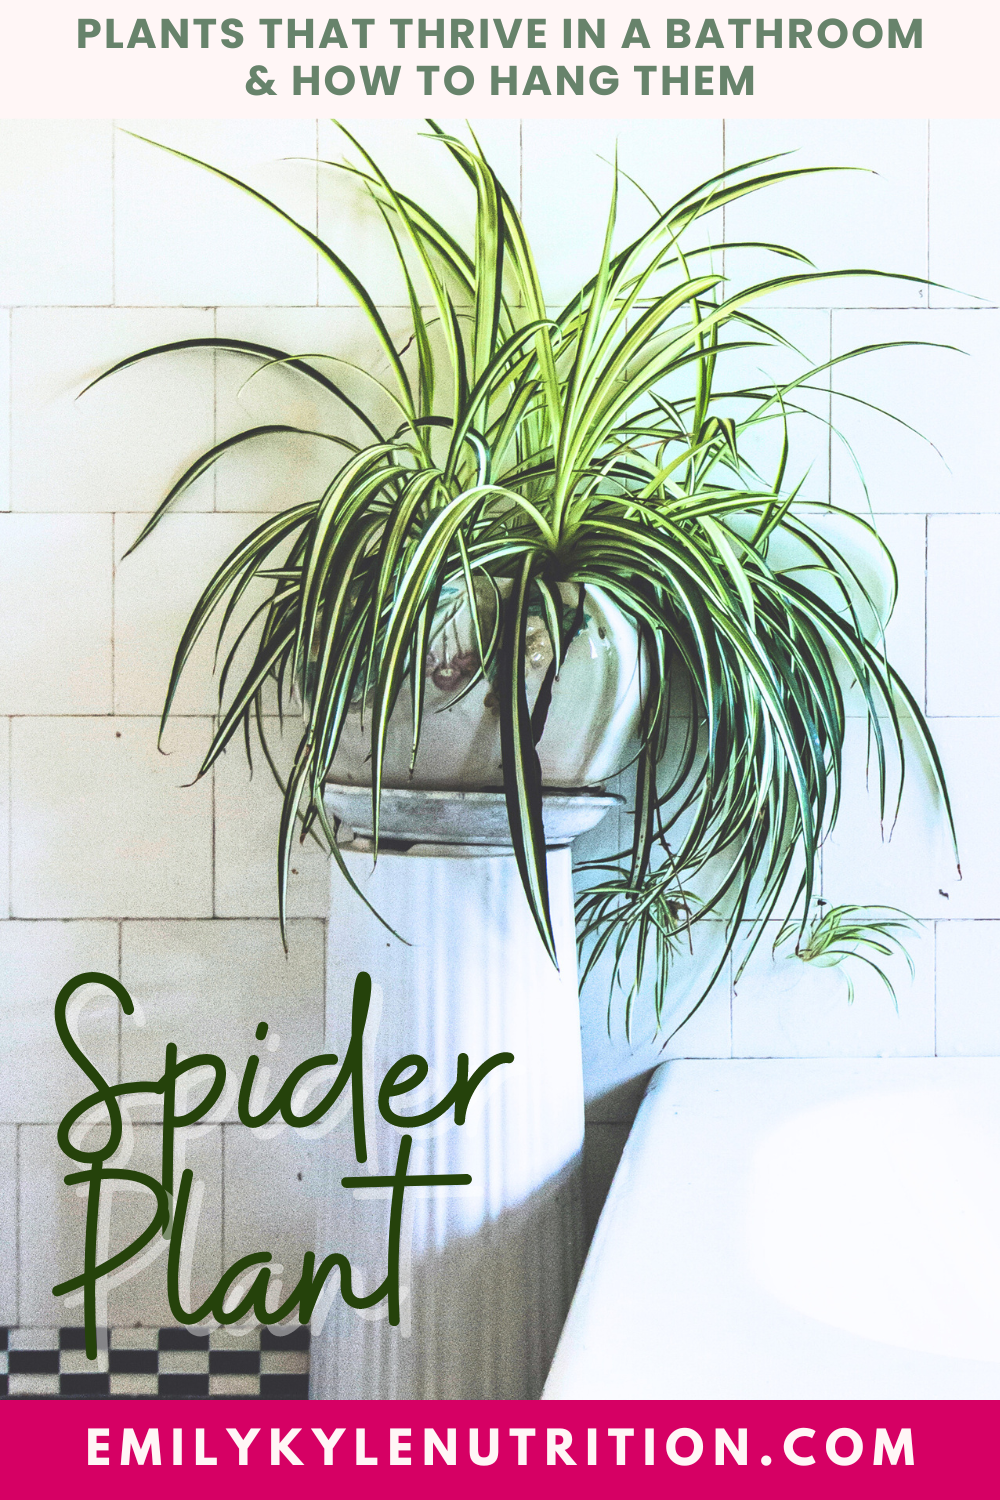 A picture of a spider plant hanging in a bathroom.